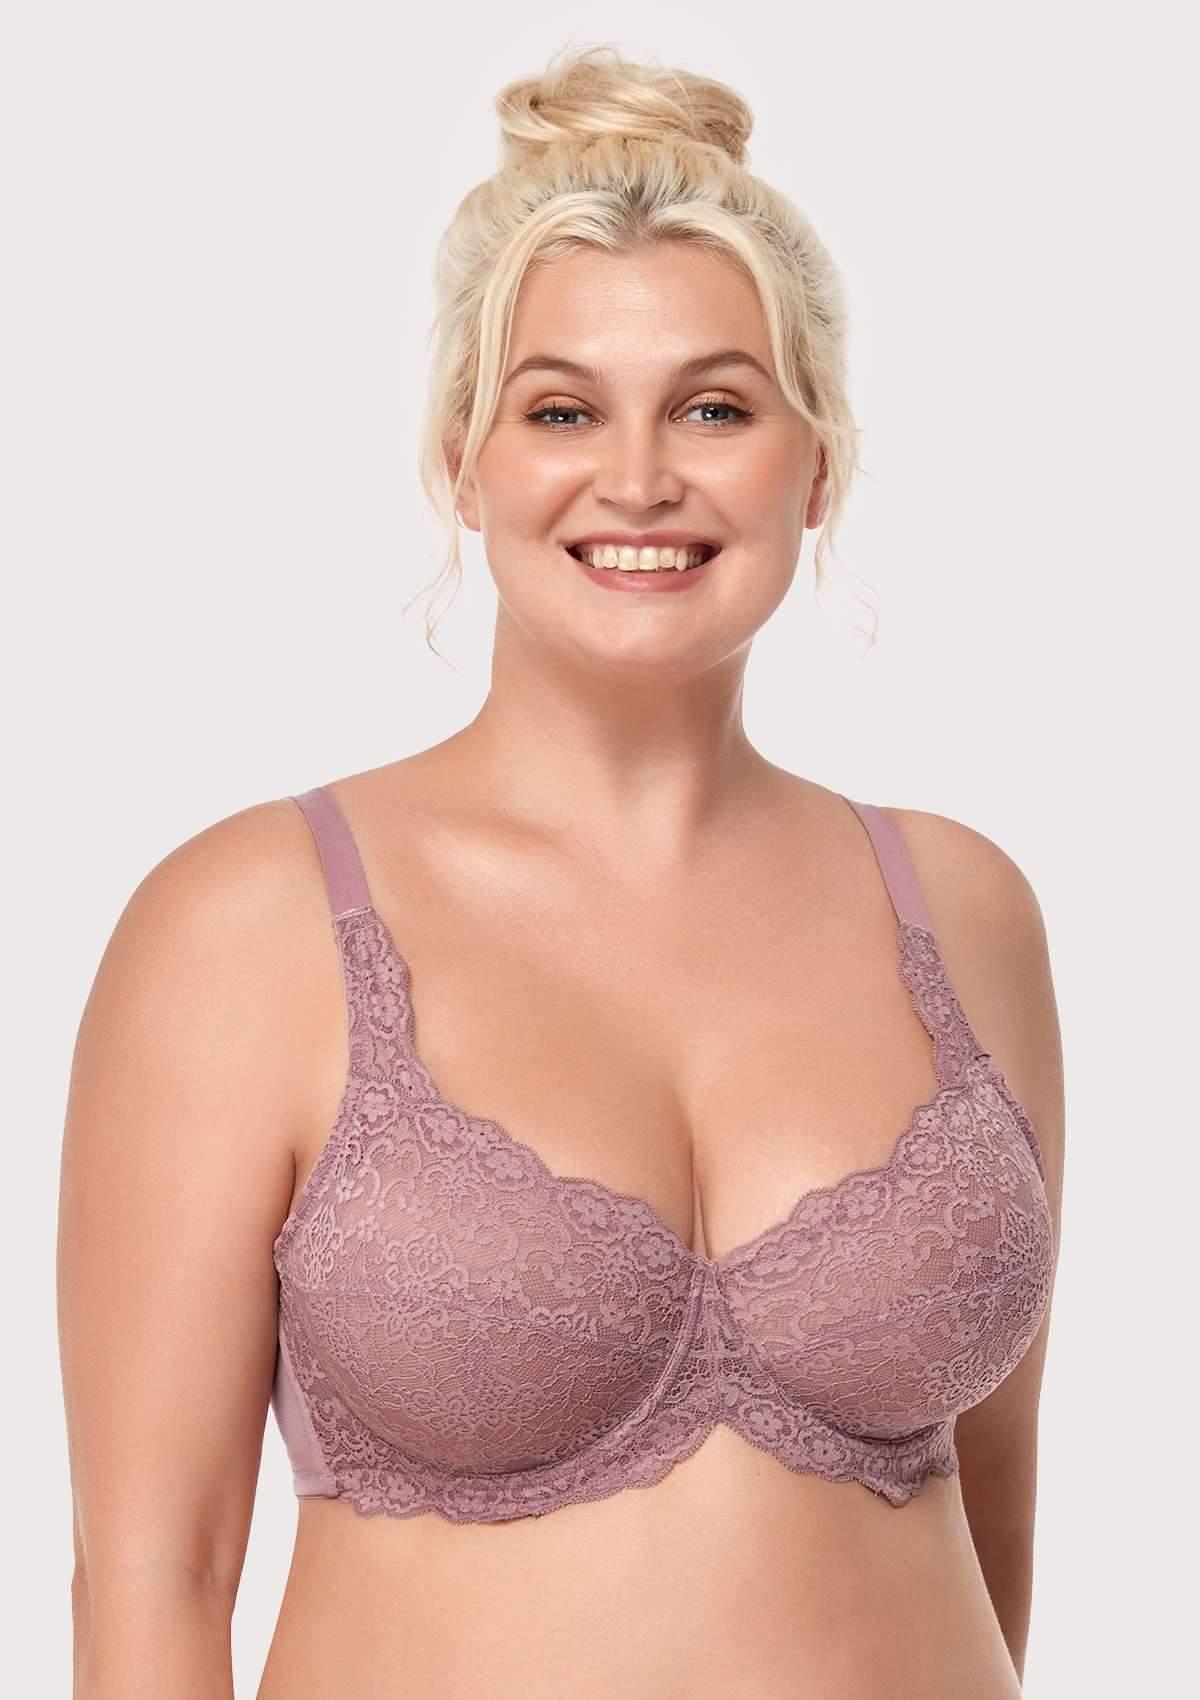 HSIA All-Over Floral Lace Unlined Bra: Minimizer Bra For Heavy Breasts - Purple / 42 / D